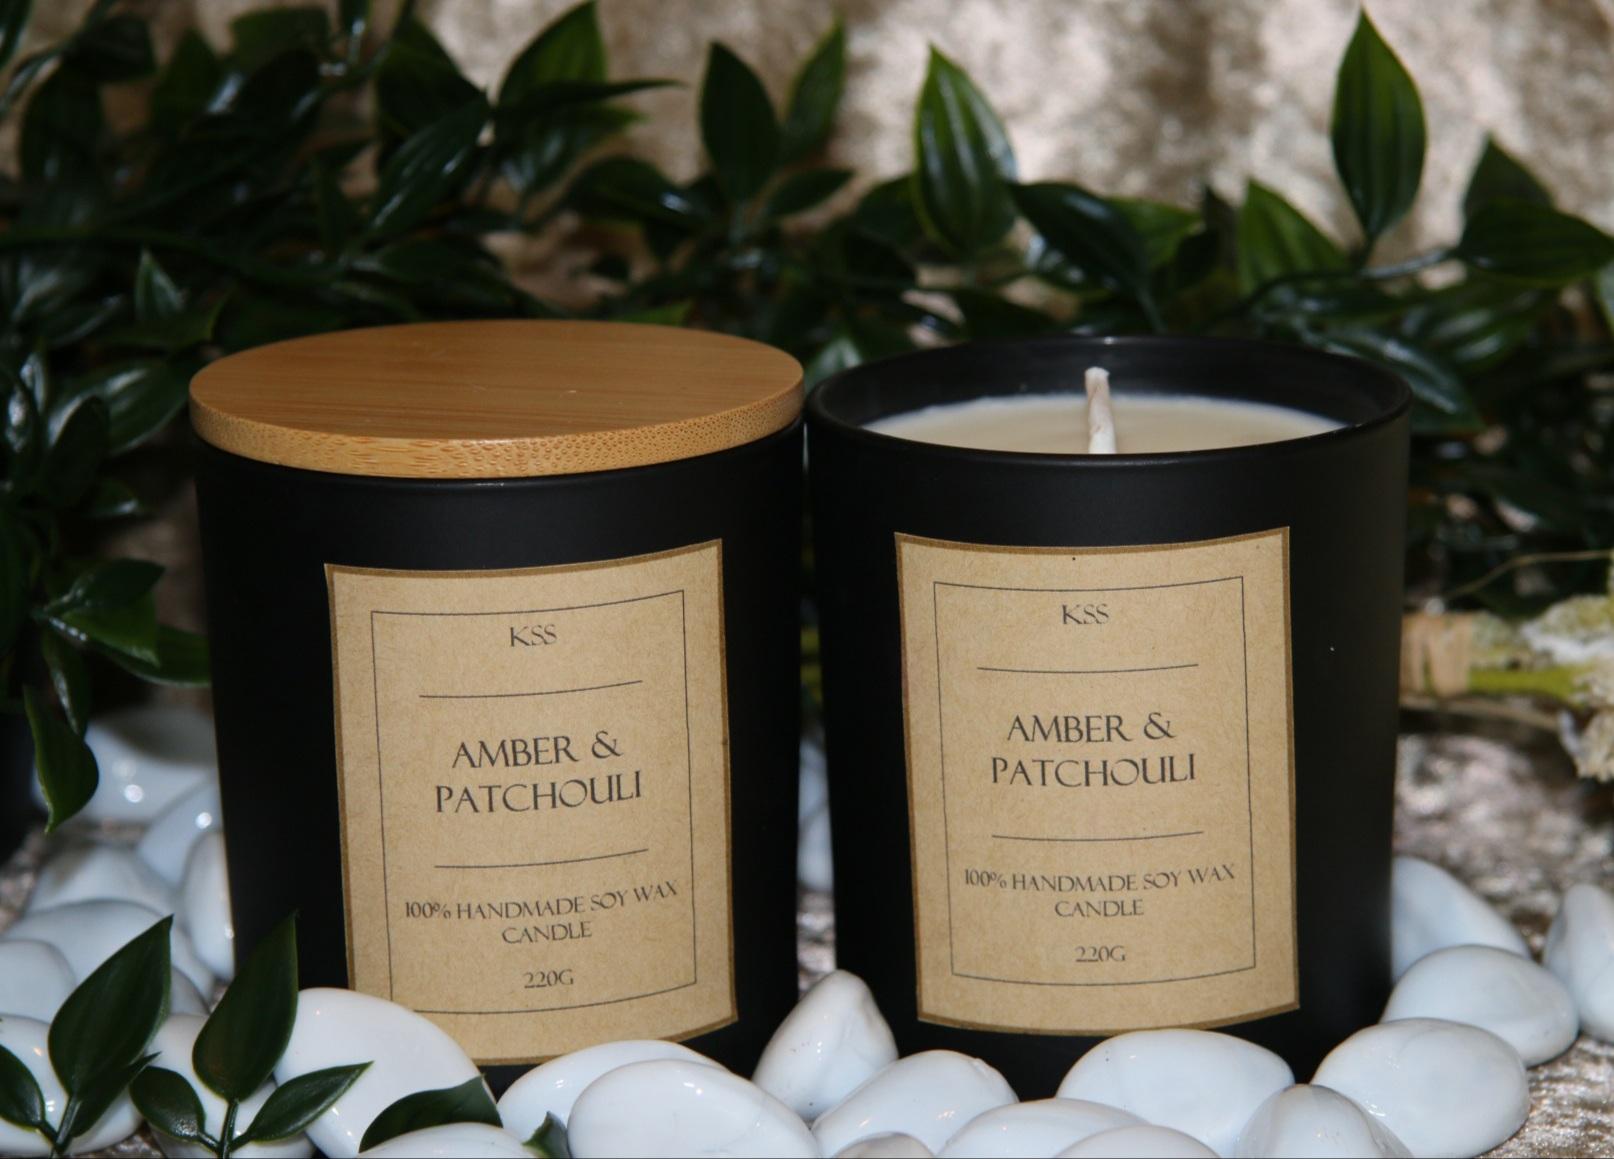 Amber & Patchouli soy wax candle